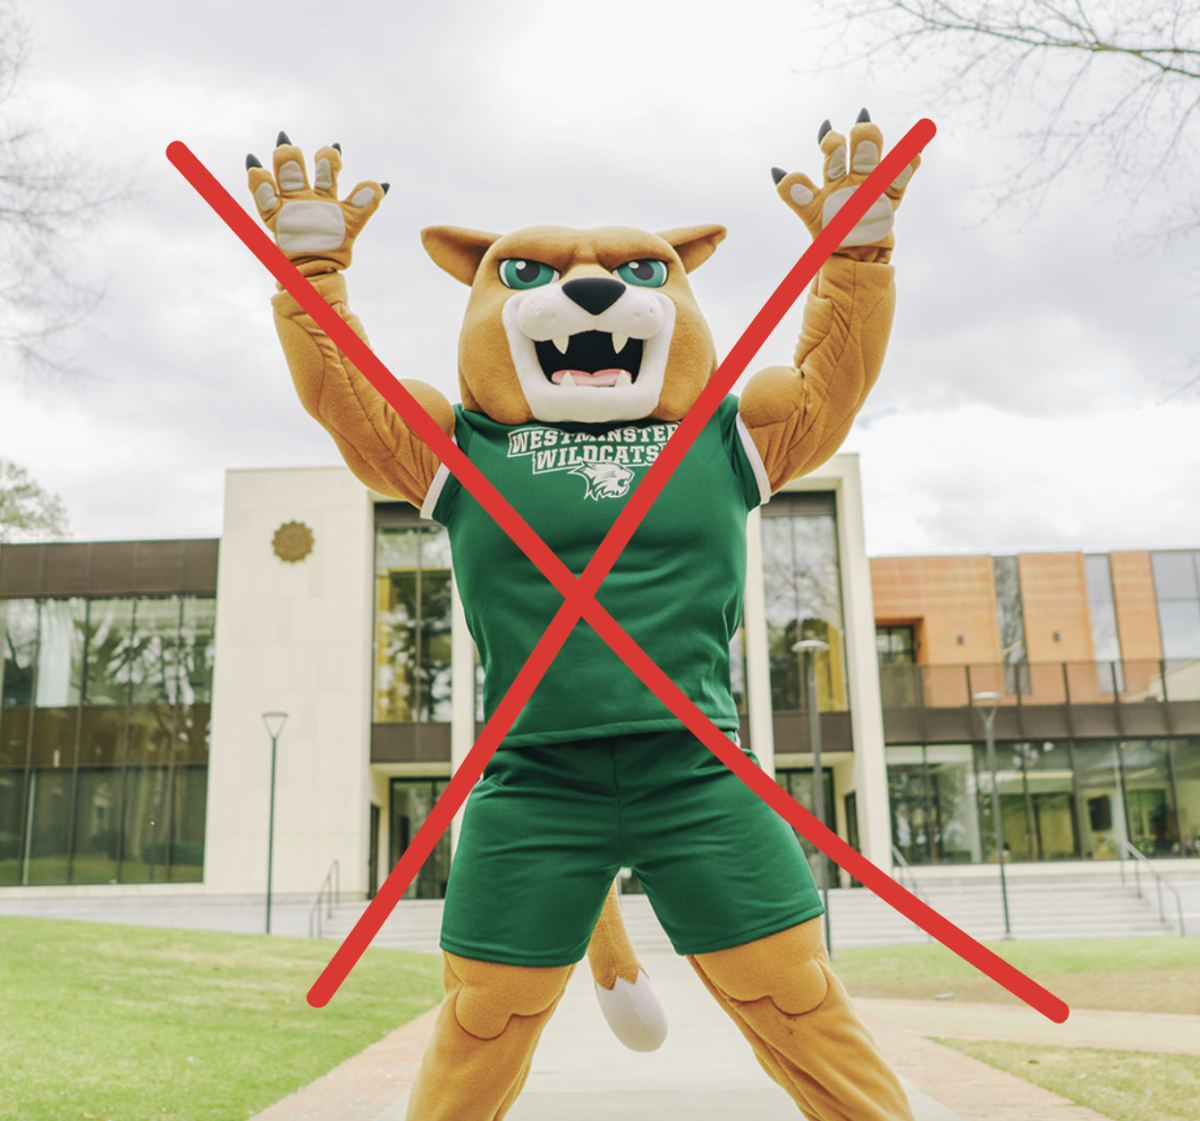 Westminster+to+switch+mascot+after+wildcat+attacked+President+Evans